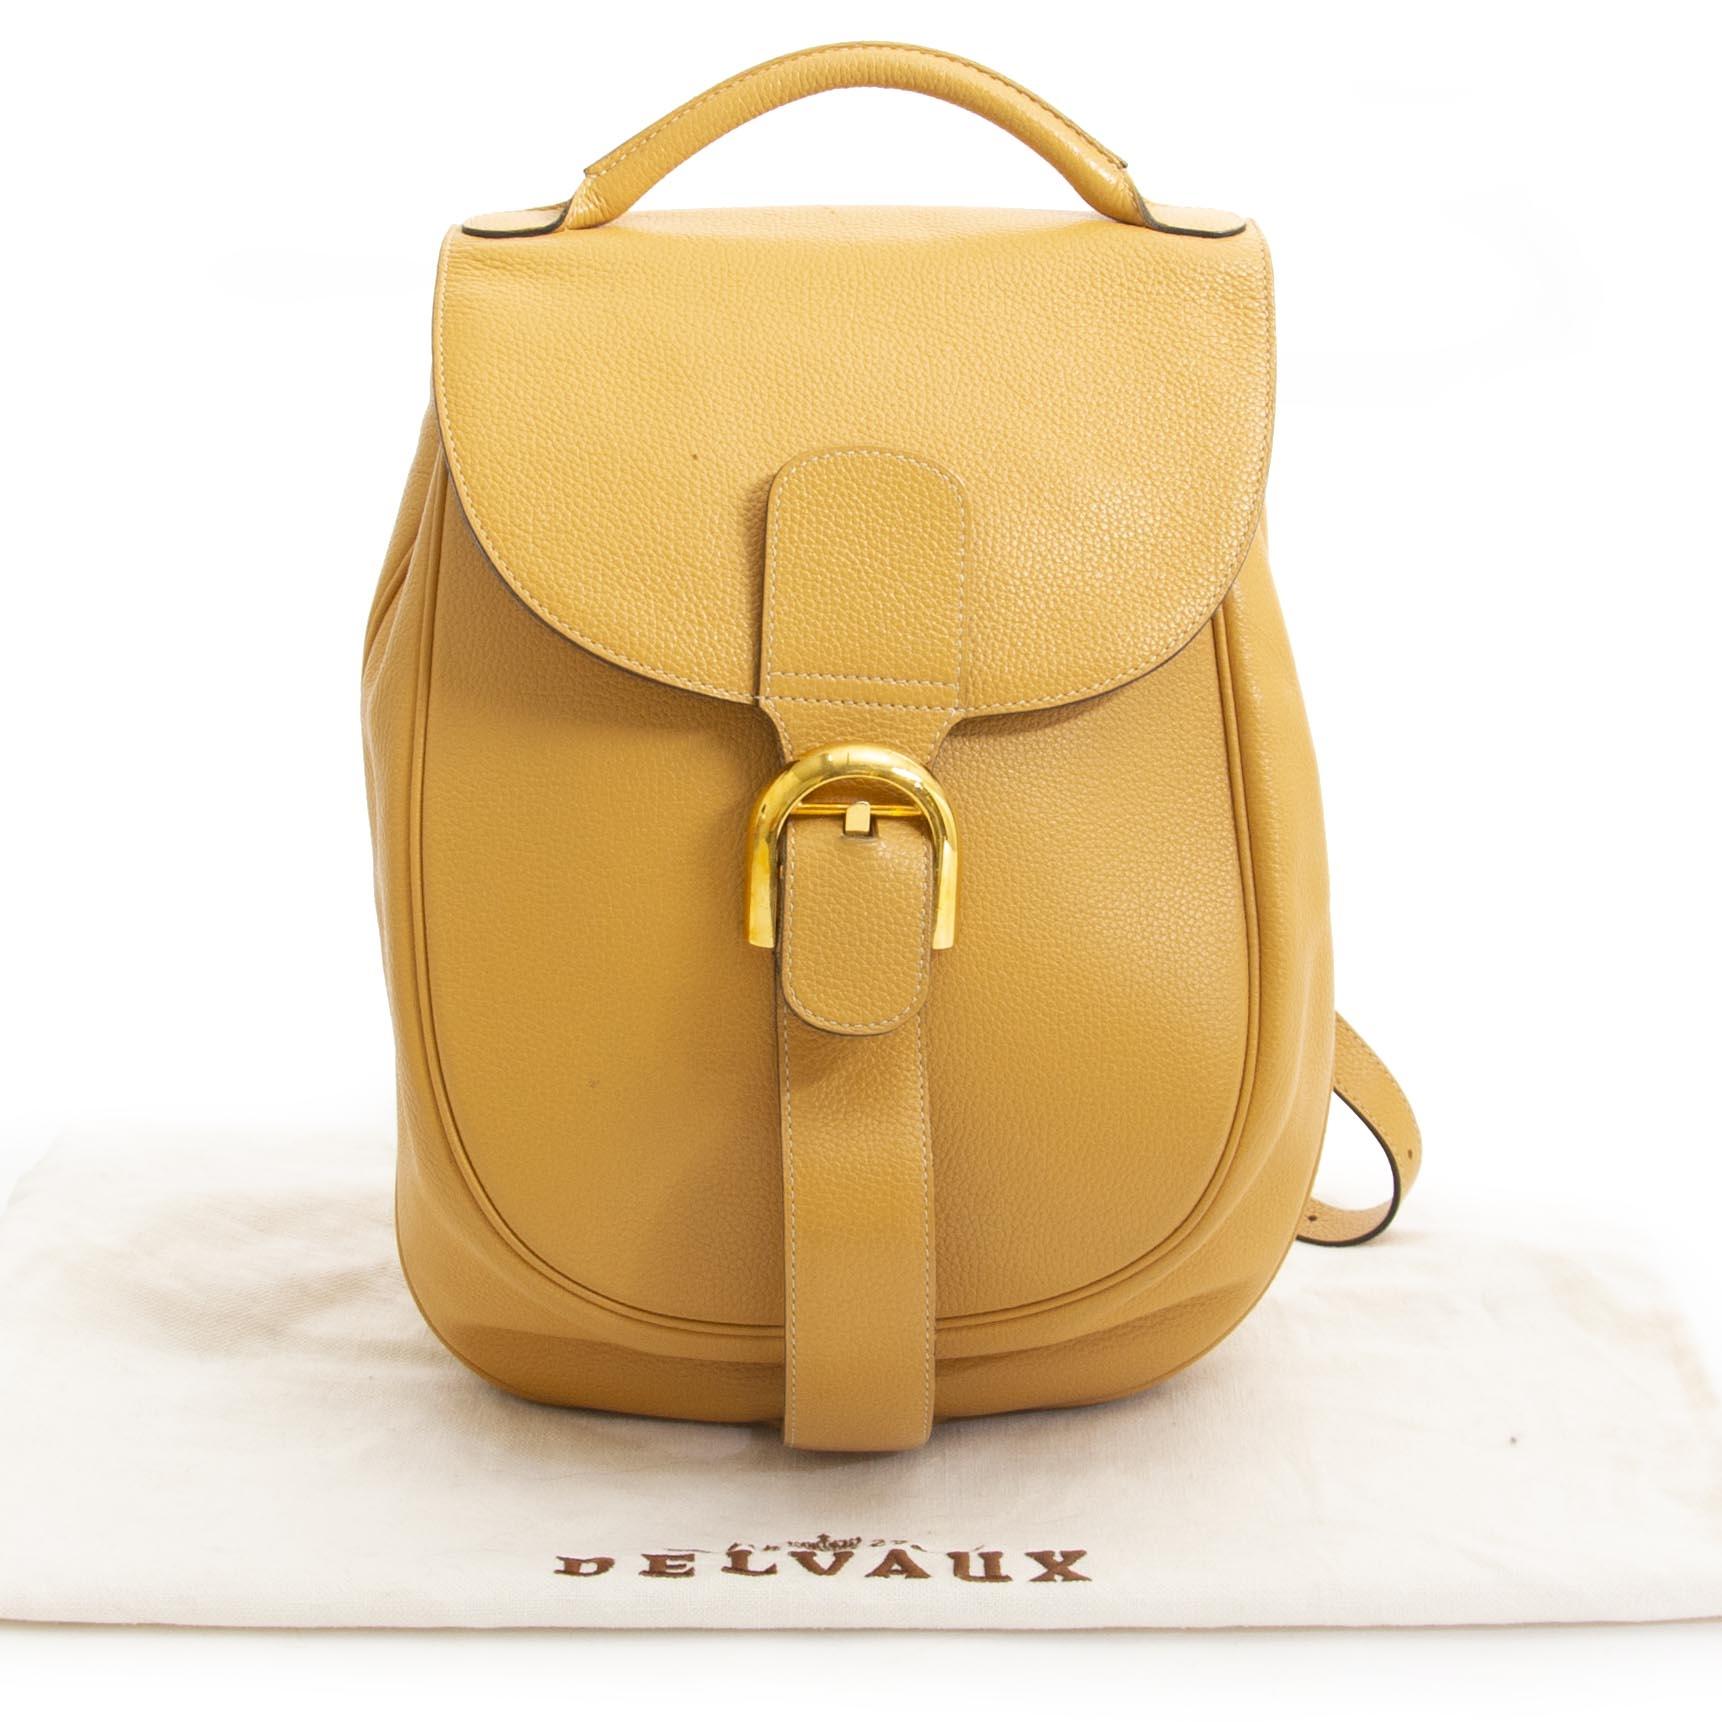 Very Good Condition

Delvaux Yellow Brillant Backpack

The Delvaux Brillant is one of the most iconic bags ever made. This backpack features all the trademark elements of THE iconic Brillant handbag, but is more easy going. 
The backpack features